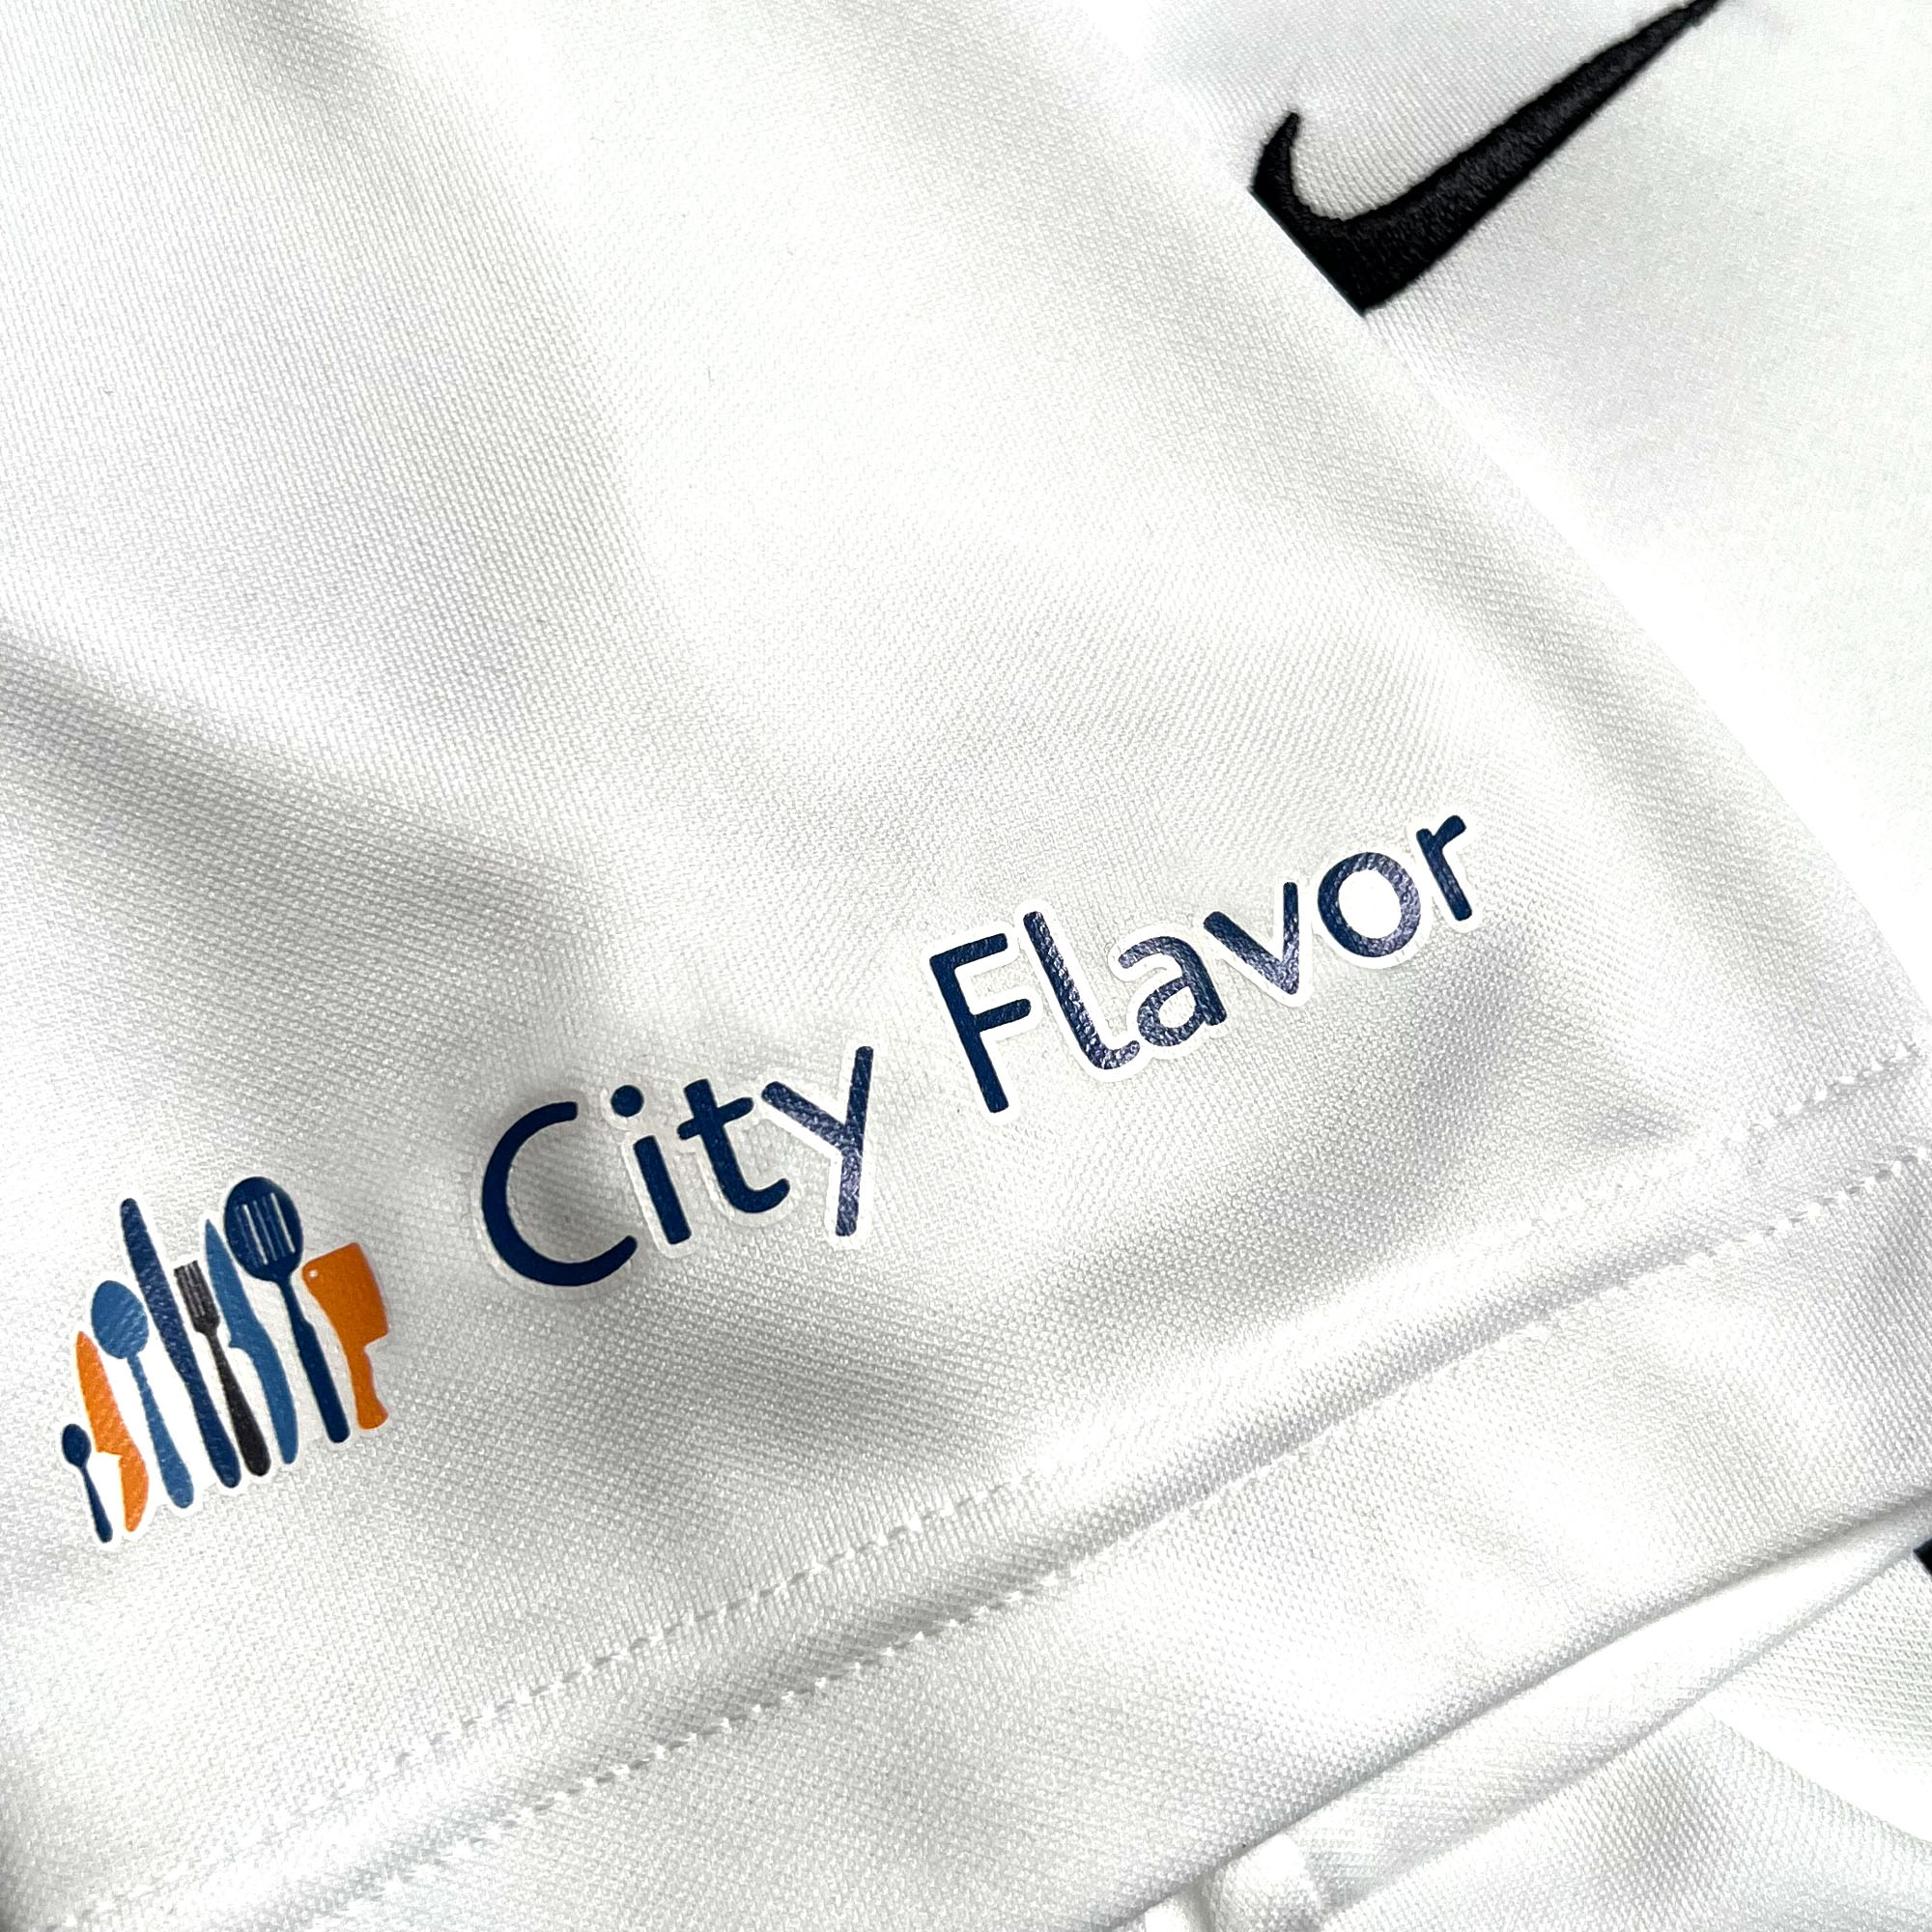 Close-up of City Flavor logo on the sleeve of a white soccer jersey.